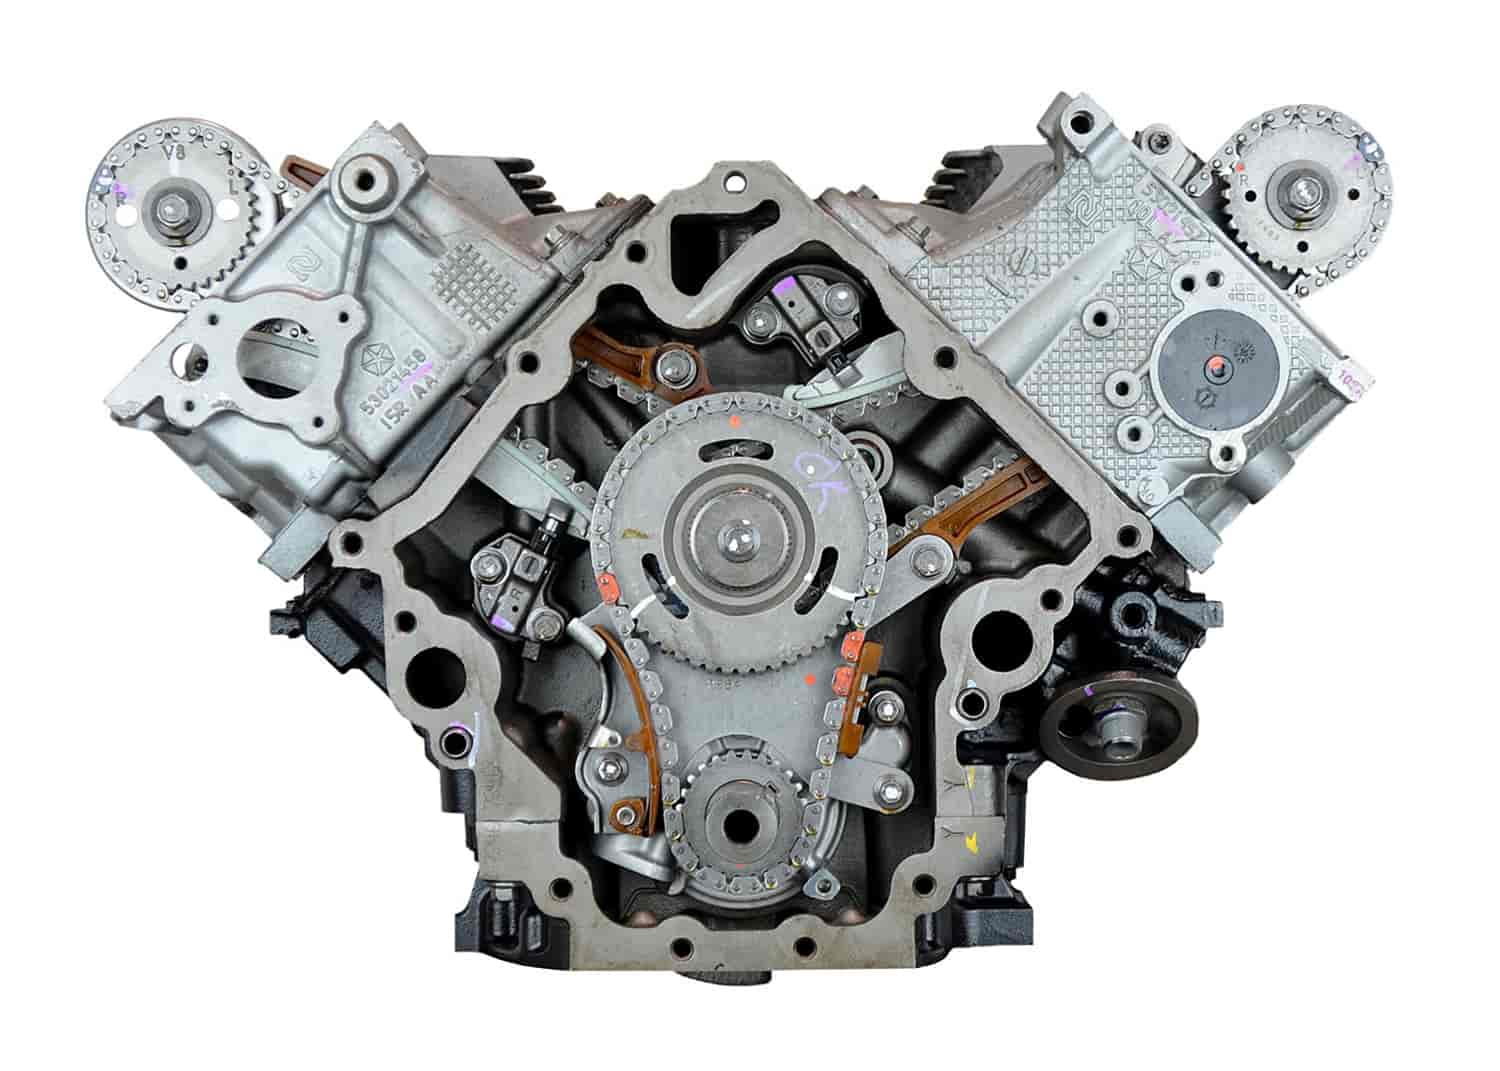 Remanufactured Crate Engine for 2005-2007 Dodge Dakota with